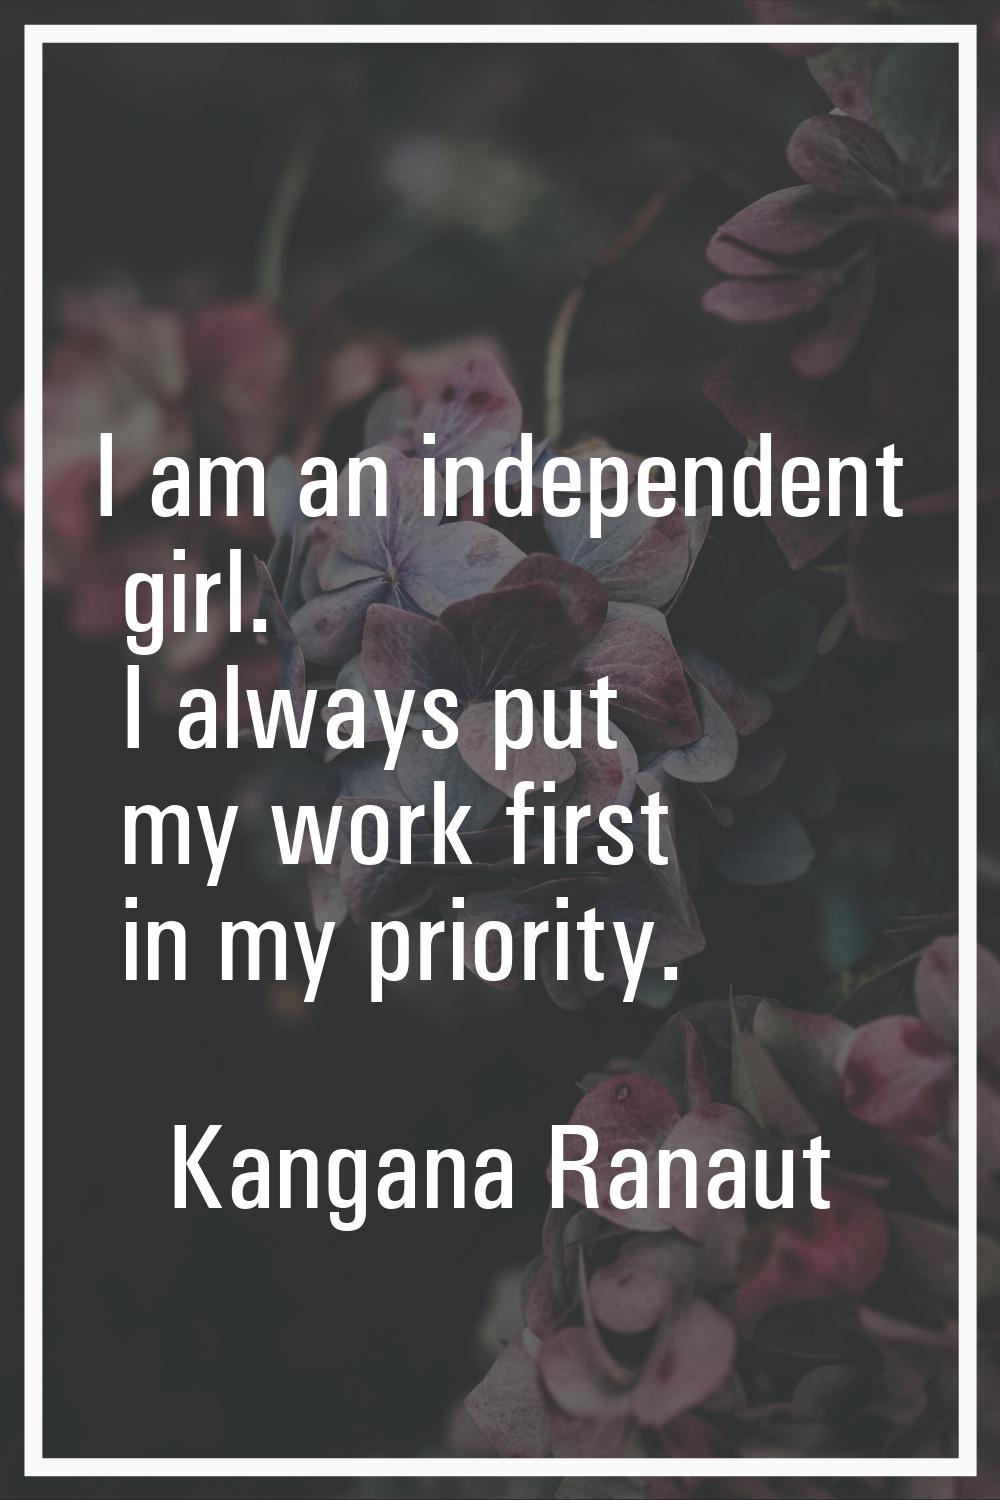 I am an independent girl. I always put my work first in my priority.